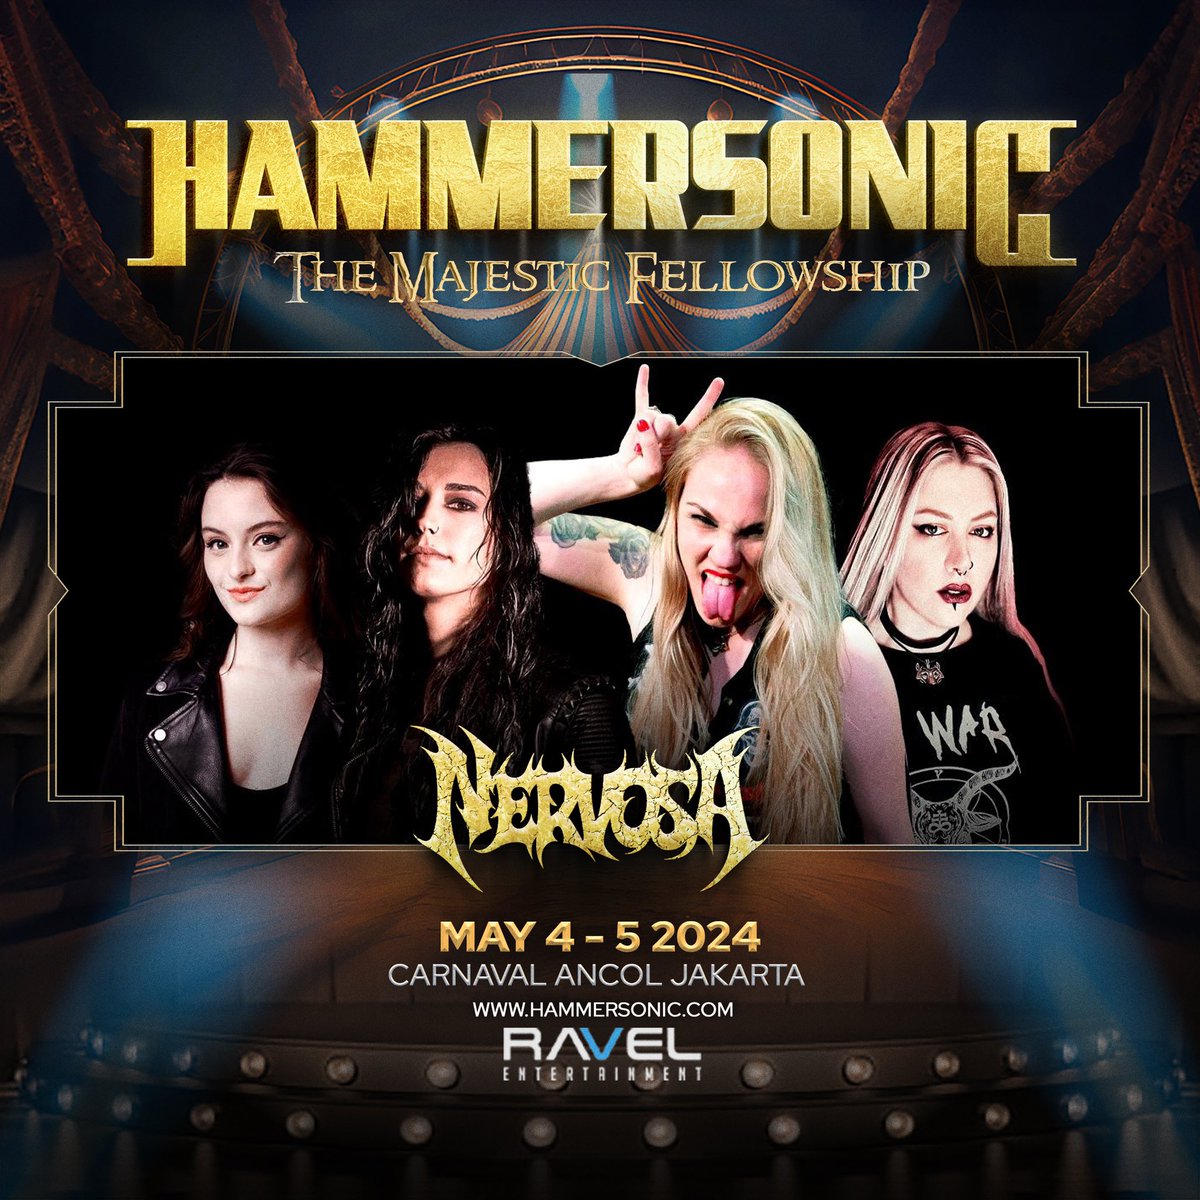 Amazing female band @nervosathrash —is a thrash/death metal band originally from São Paulo, Brazil. The band is signed to Napalm Records and has released four studio albums and one EP. Tickets will go on sale soon at hammersonic.com #Hammersonic #RavelEntertainment